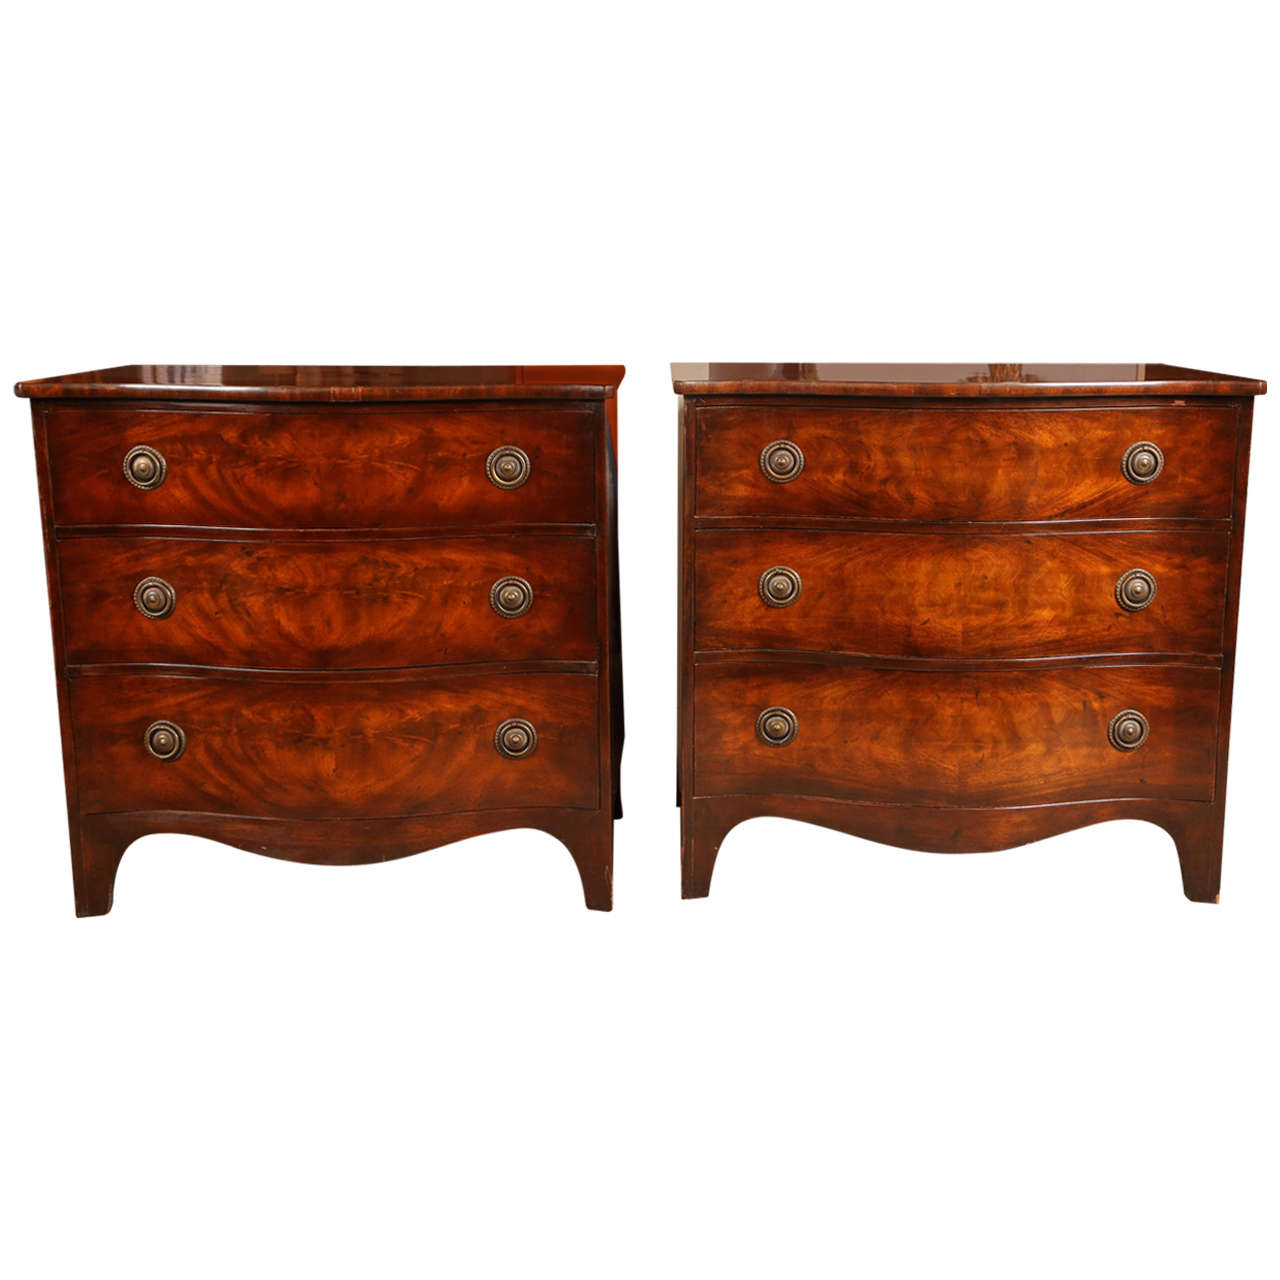 Pair of Georgian Style Baker Bachelor Chests, Commodes, or Nighstands